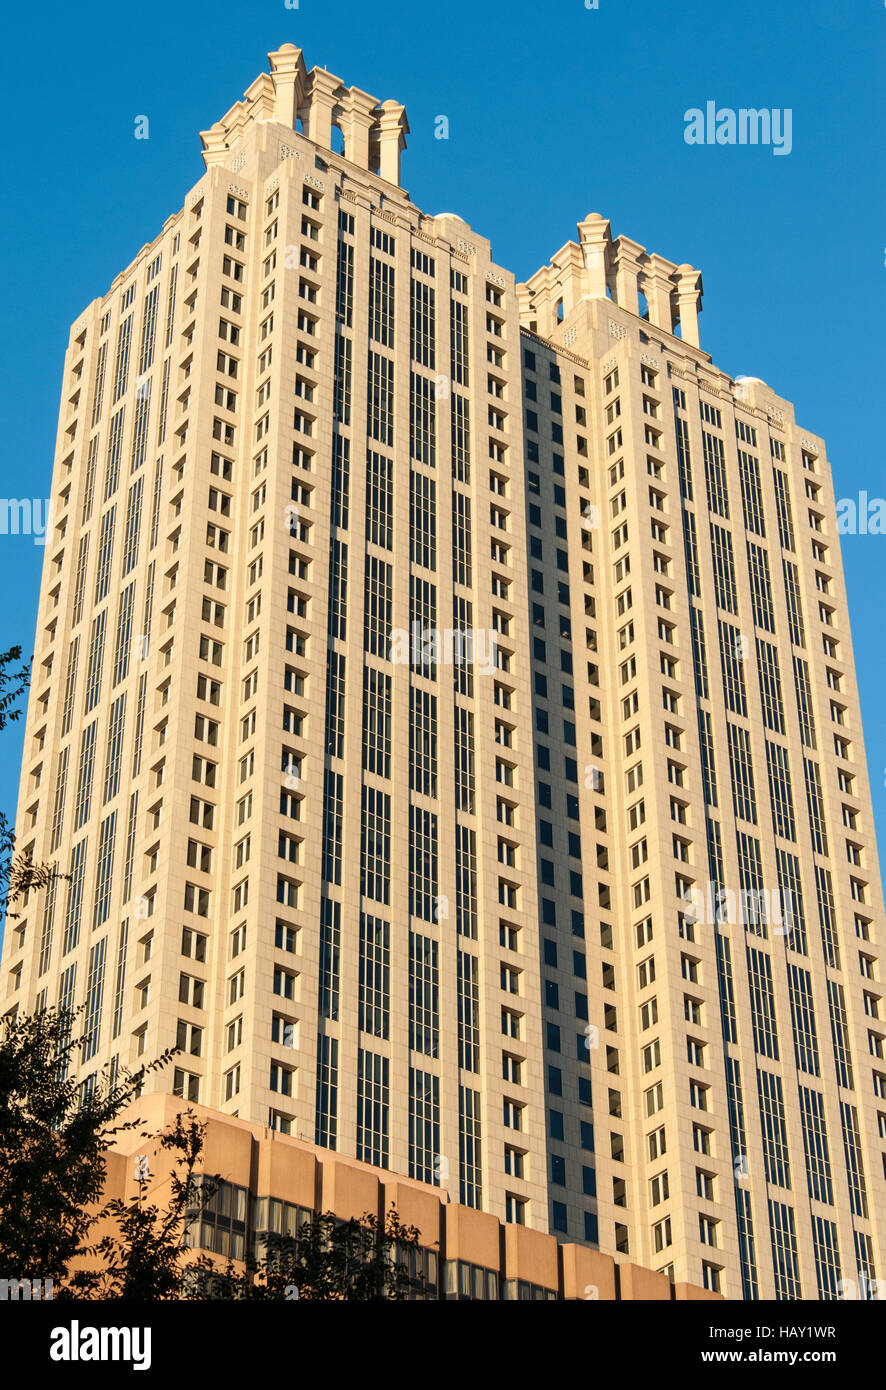 One Ninety One Peachtree Tower stands as an iconic landmark in downtown Atlanta, Georgia, USA. Stock Photo